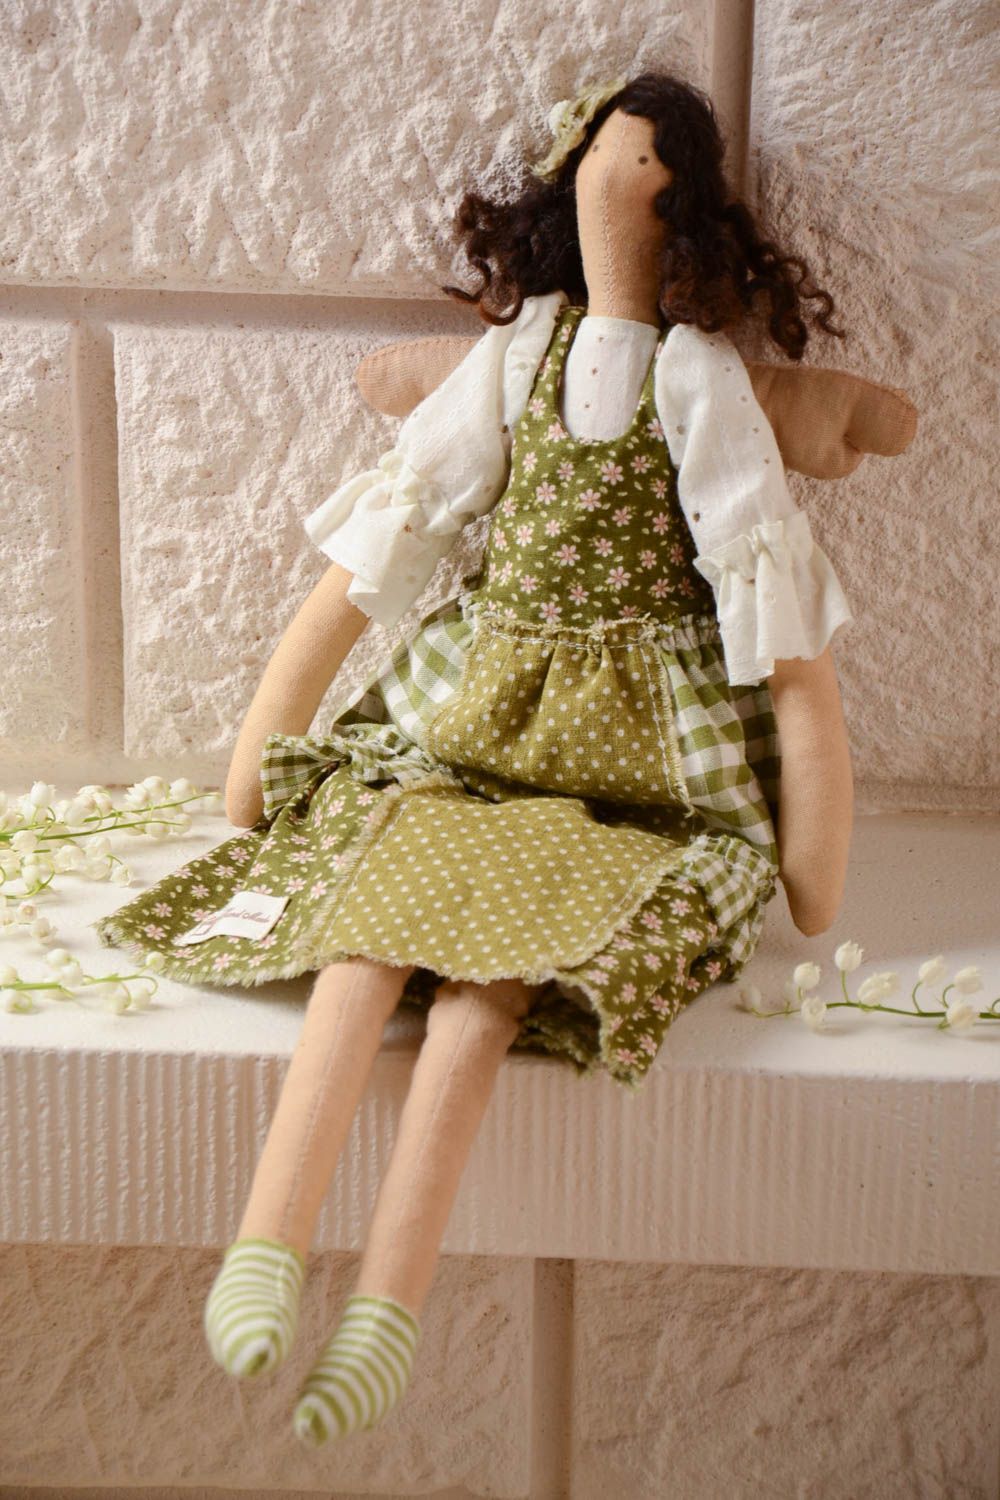 Handmade soft doll sewn of natural fabrics with curly hair in green dress photo 1